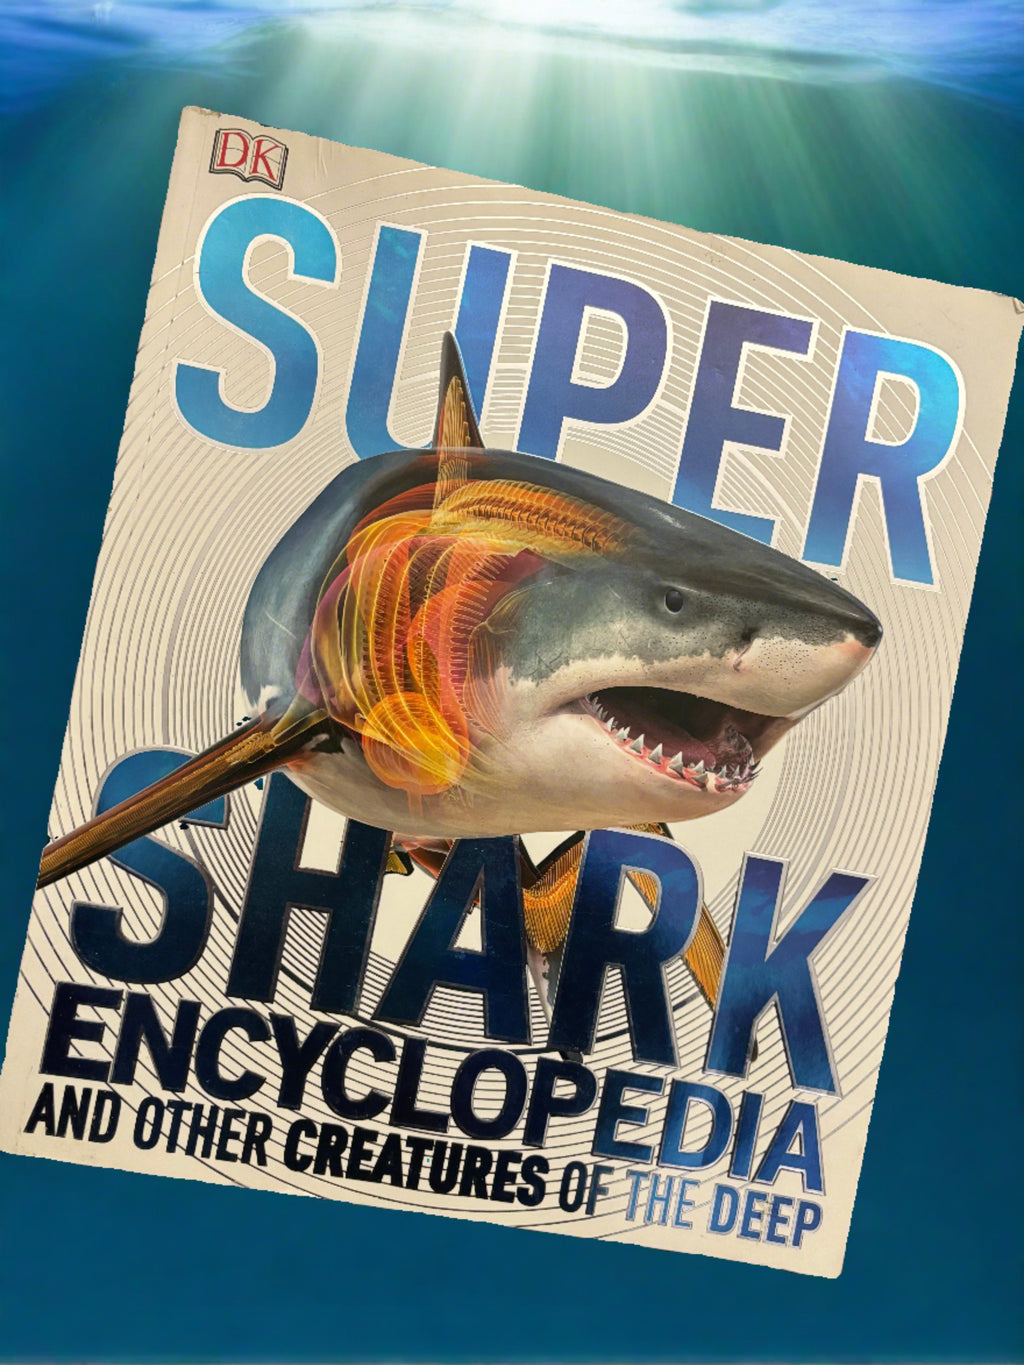 Super Shark Encyclopedia and Other Creatures of the Deep- By DK